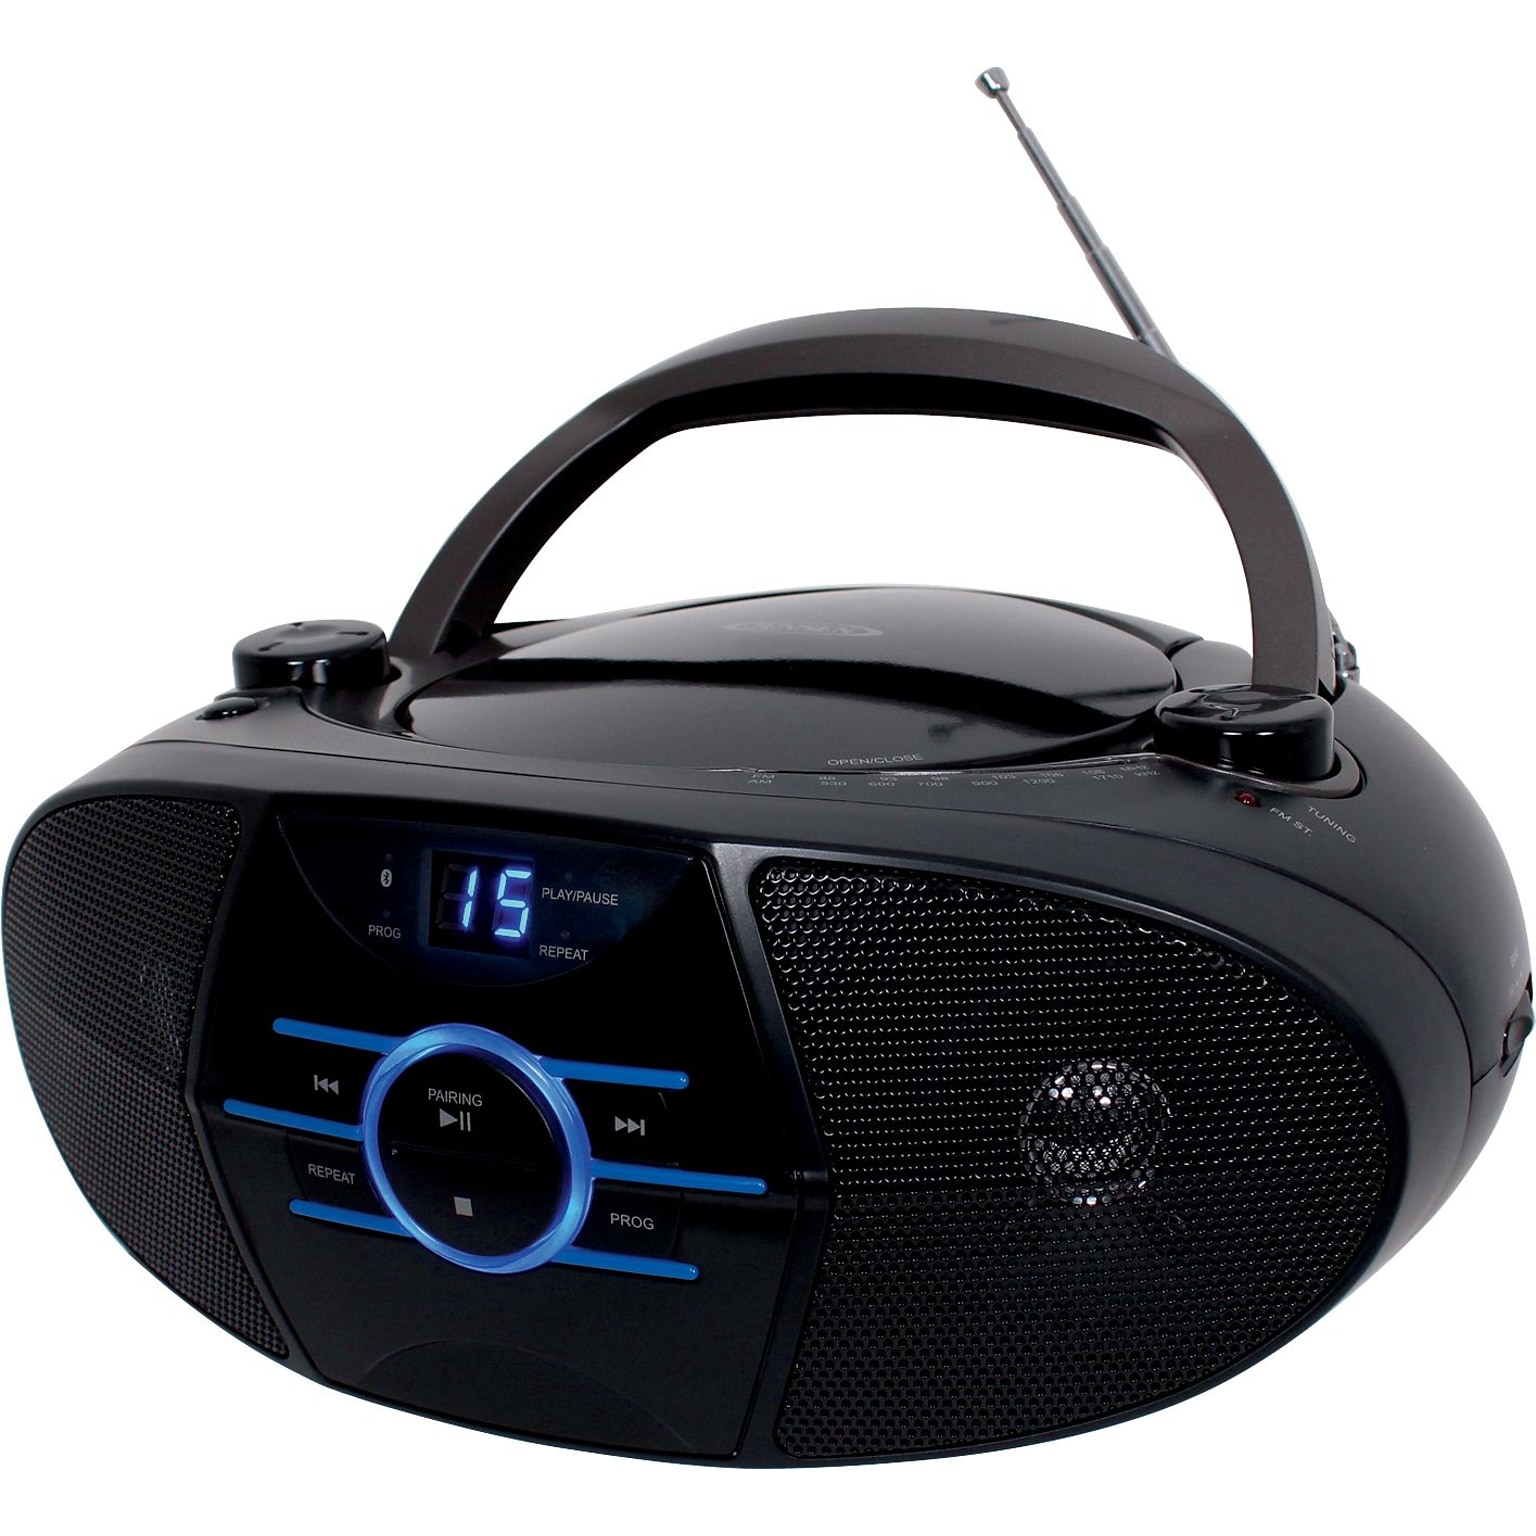 Jensen CD-560 Portable Bluetooth Boombox with CD Player, Black